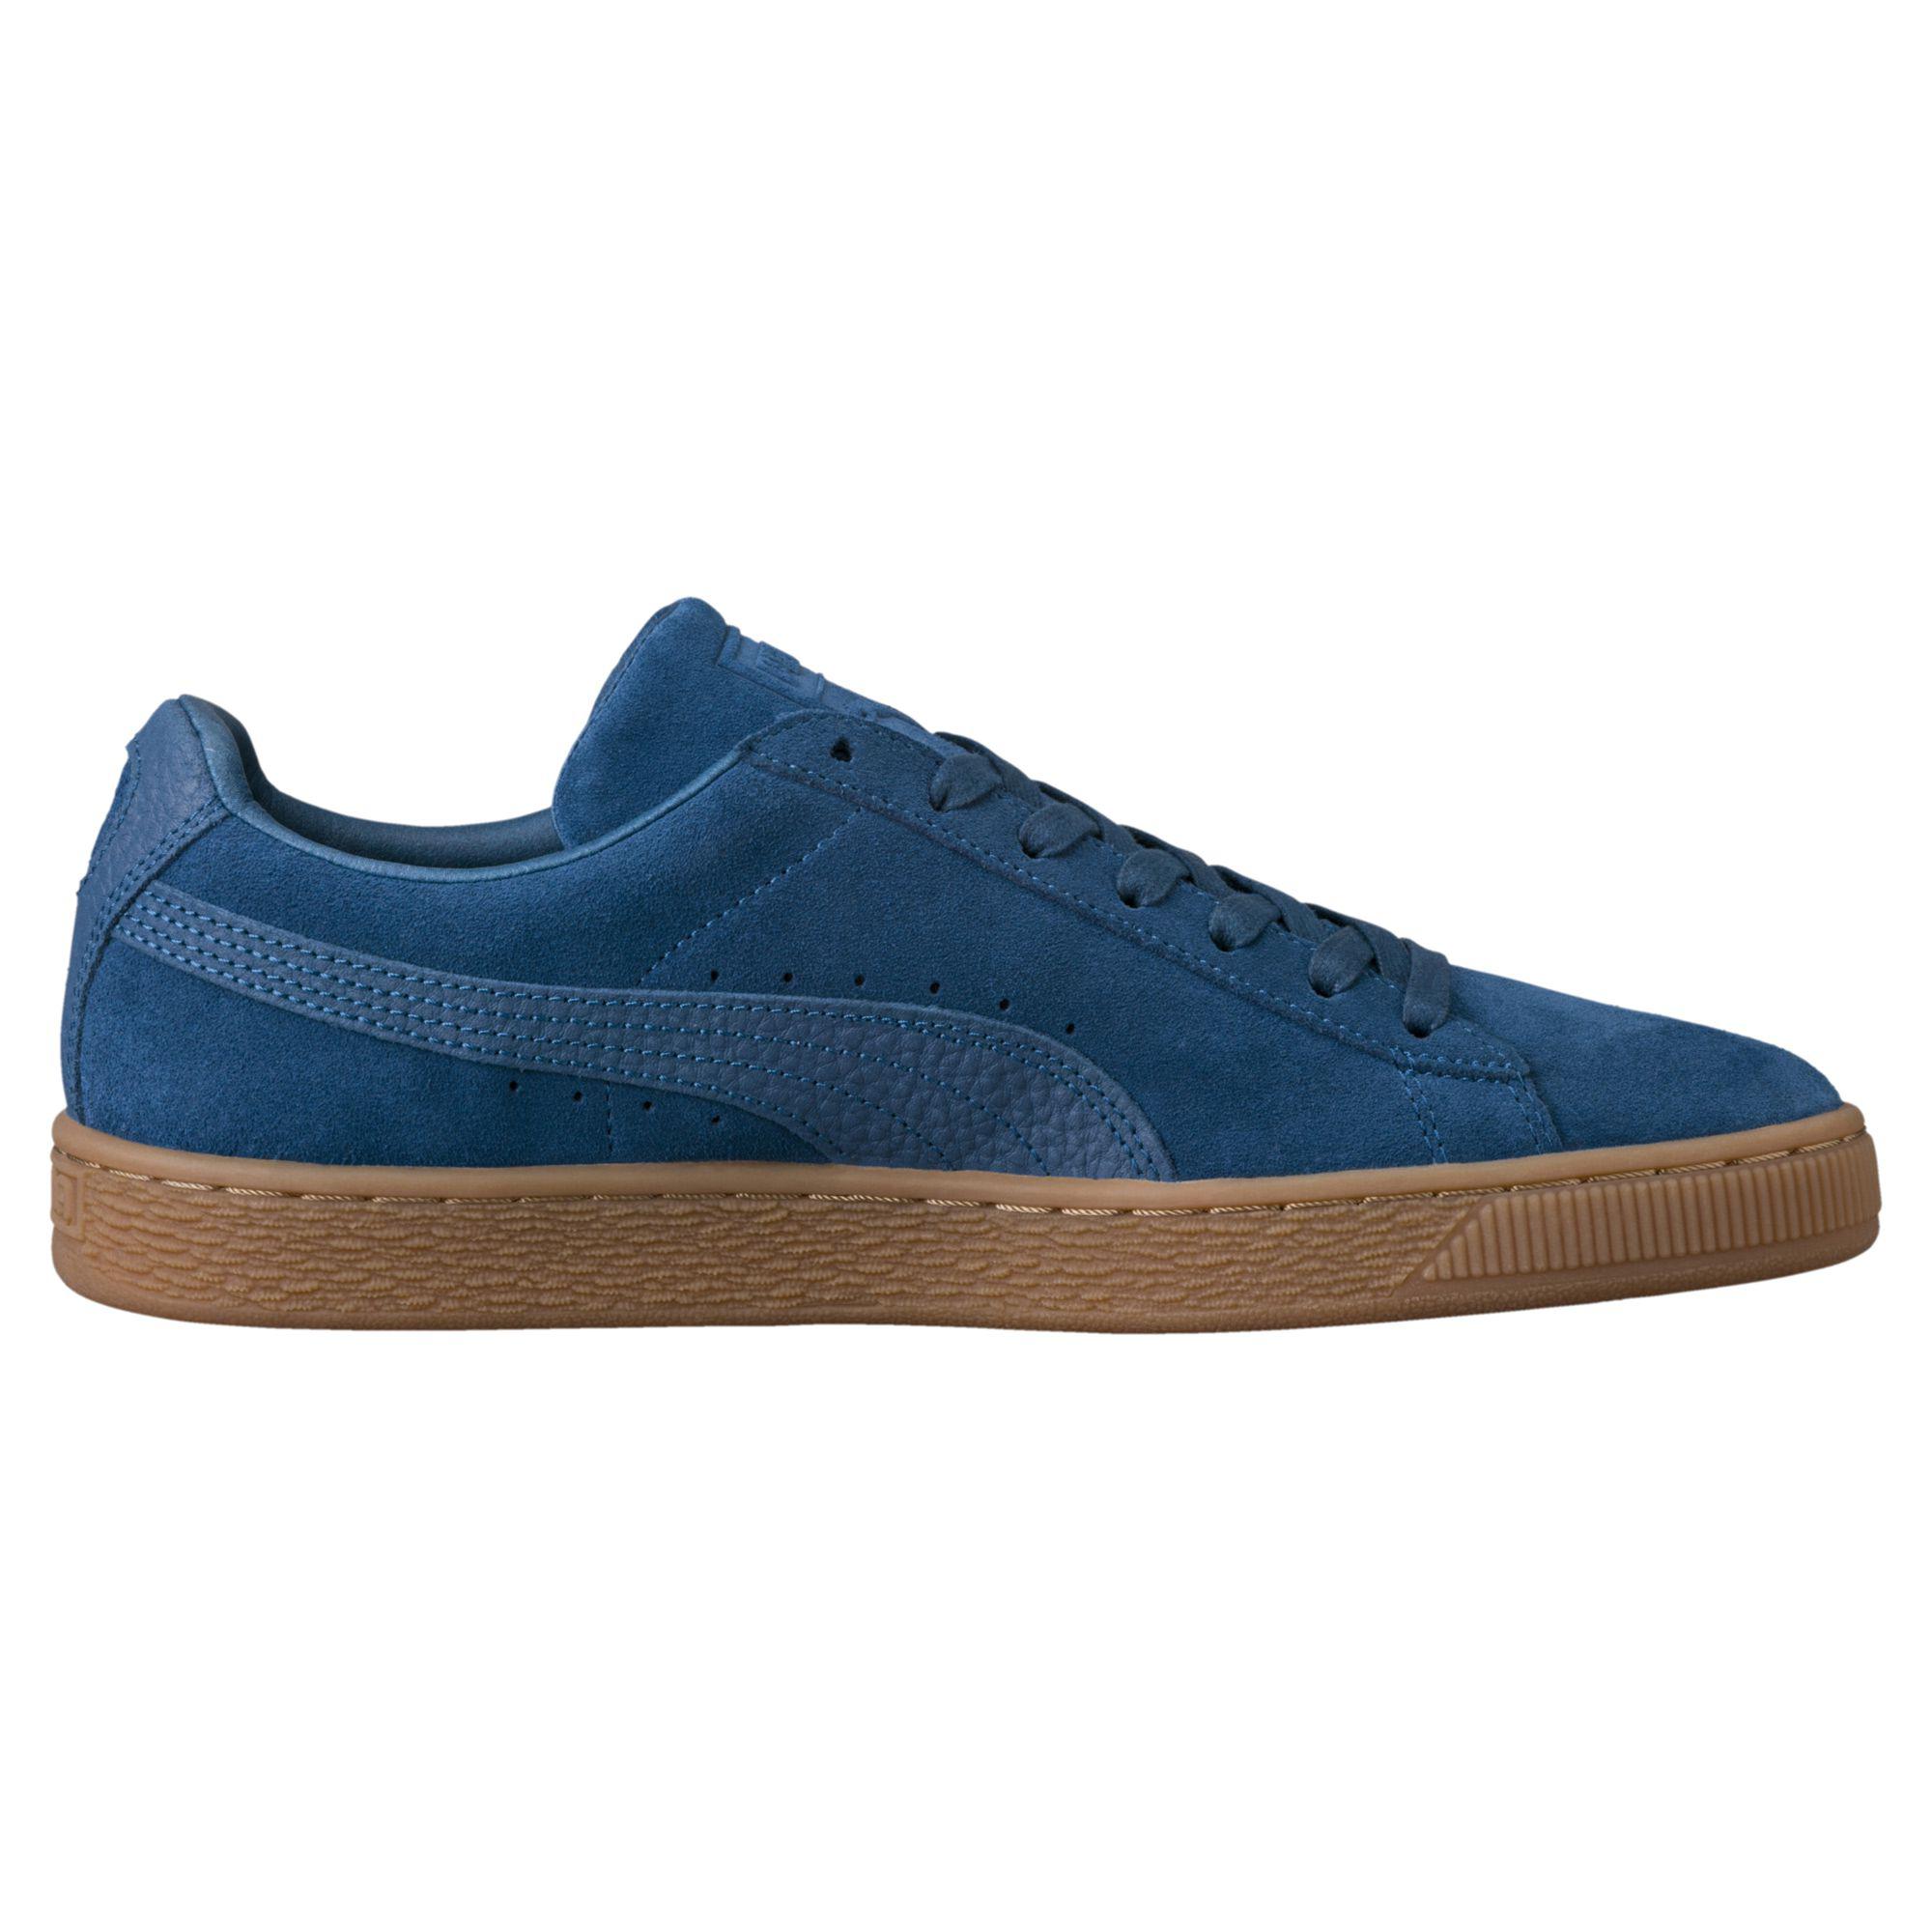 PUMA Suede Classic Natural Warmth Sneakers in Blue for Men - Lyst